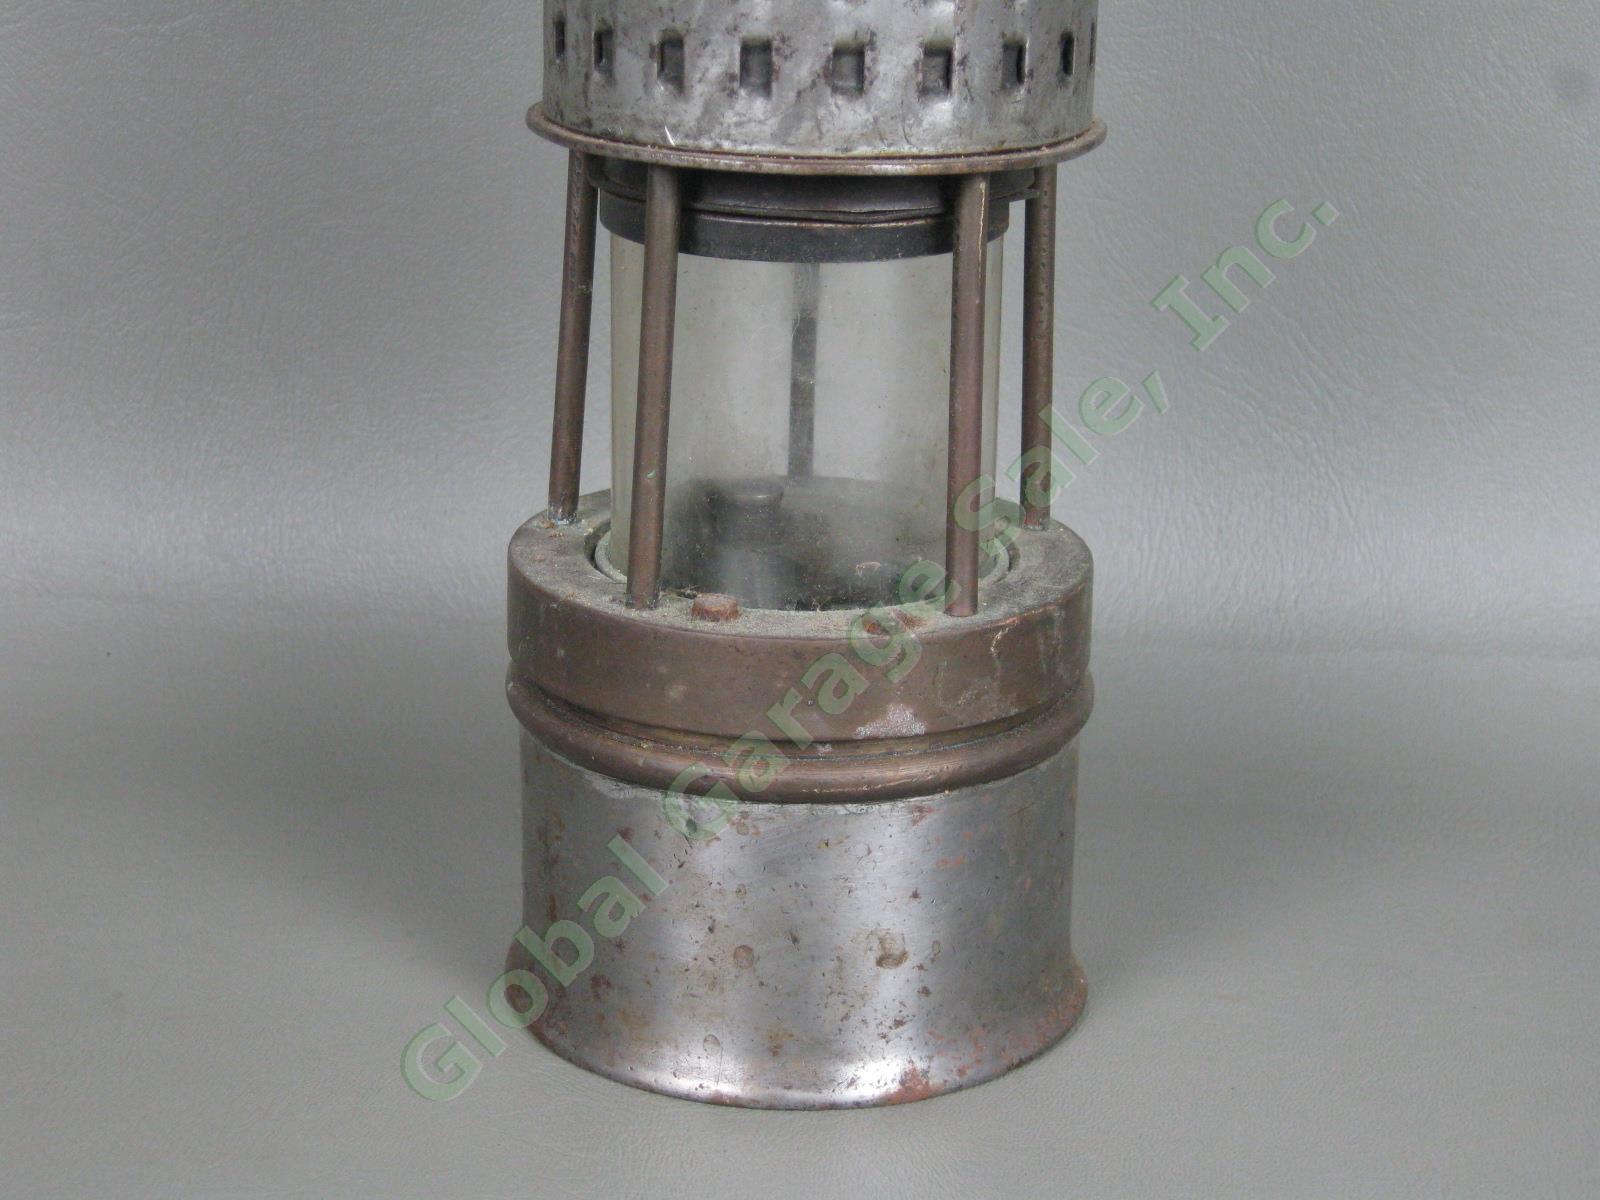 Vtg Permissible 201 Miners Safety Lamp Glen Alden Coal Co 29 No 19 Colly Tag NR! 3